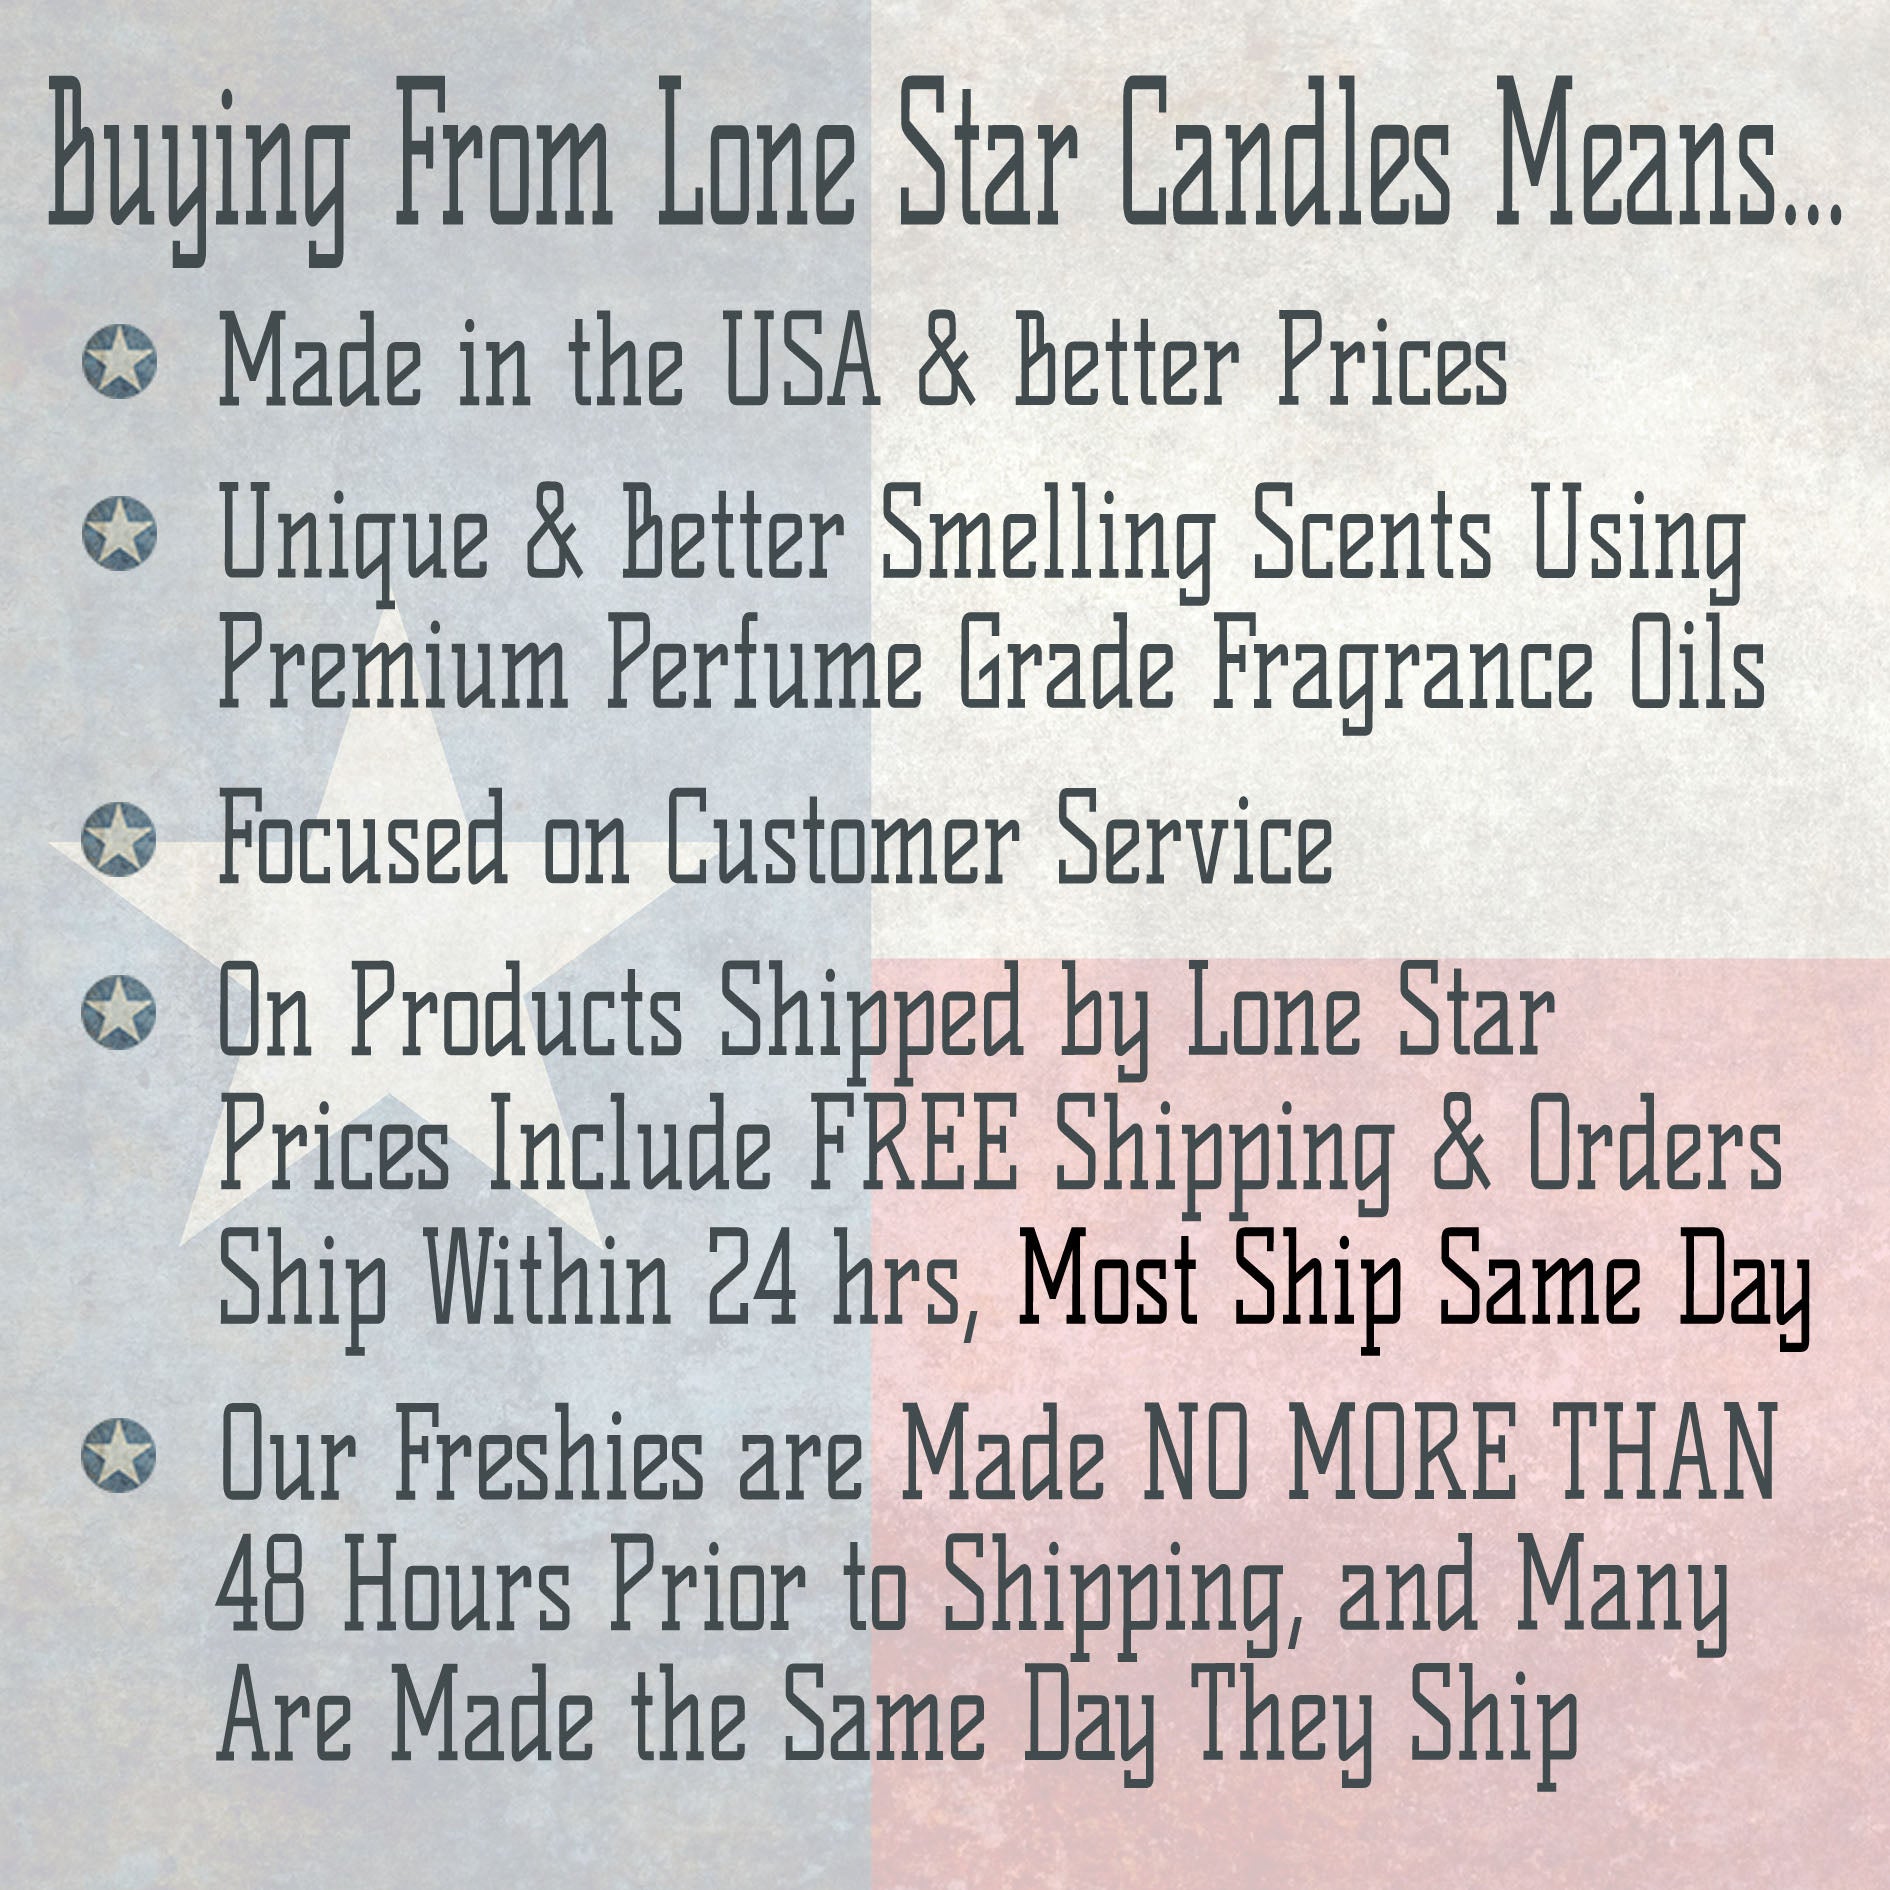 Red Hot Leather, Lone Star Candles & More's Premium Strongly Scented Freshies, A Unique Blend of Red Hots and Genuine Leather, Car & Air Freshener, USA Made in Texas, High Heel 1-Pack